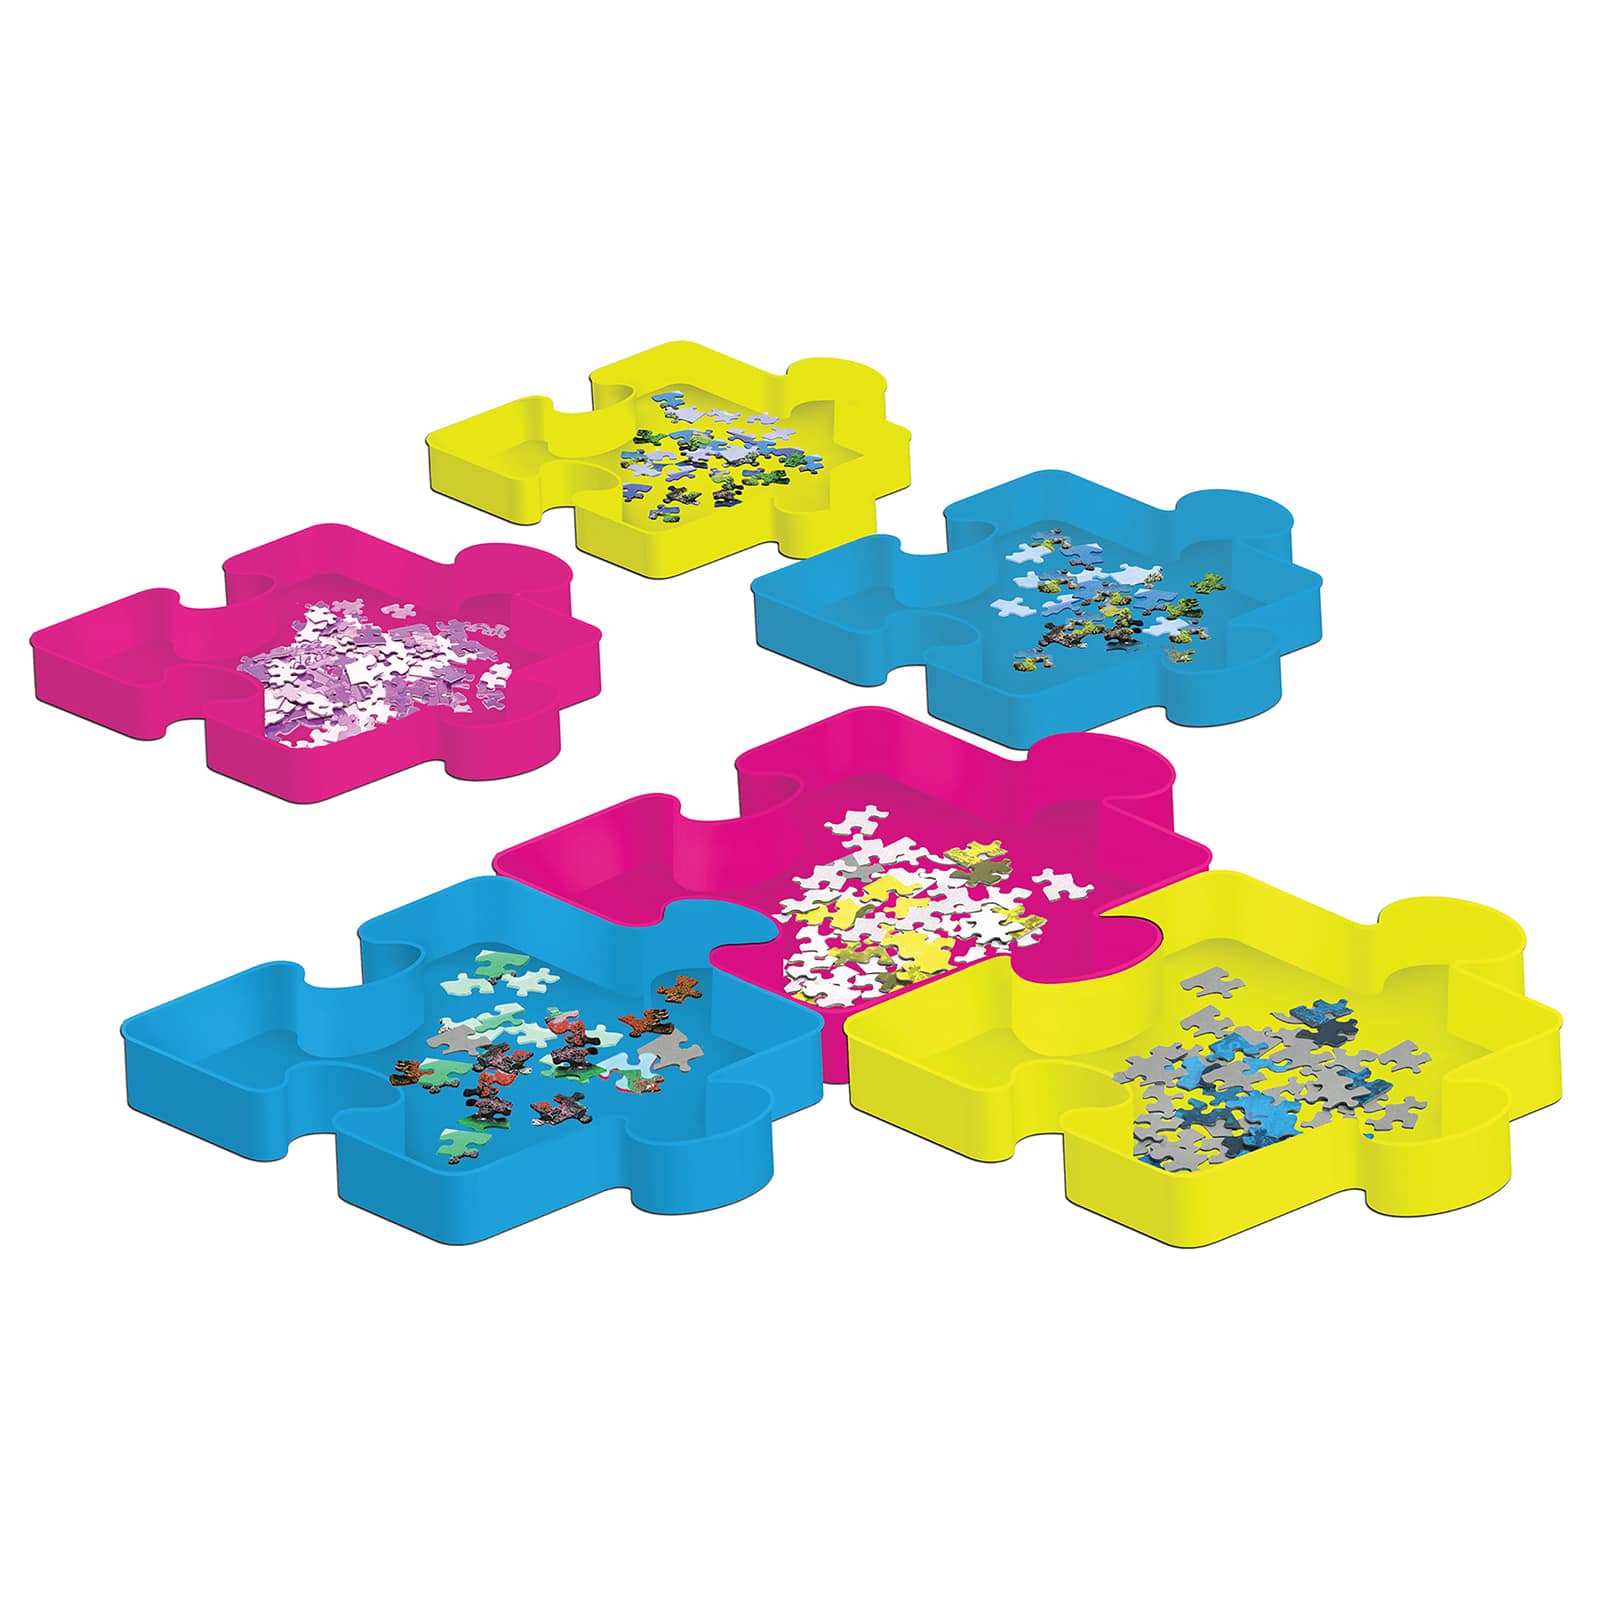 MasterPieces Sort and Save 6 piece - Jigsaw Puzzle Sorting Trays